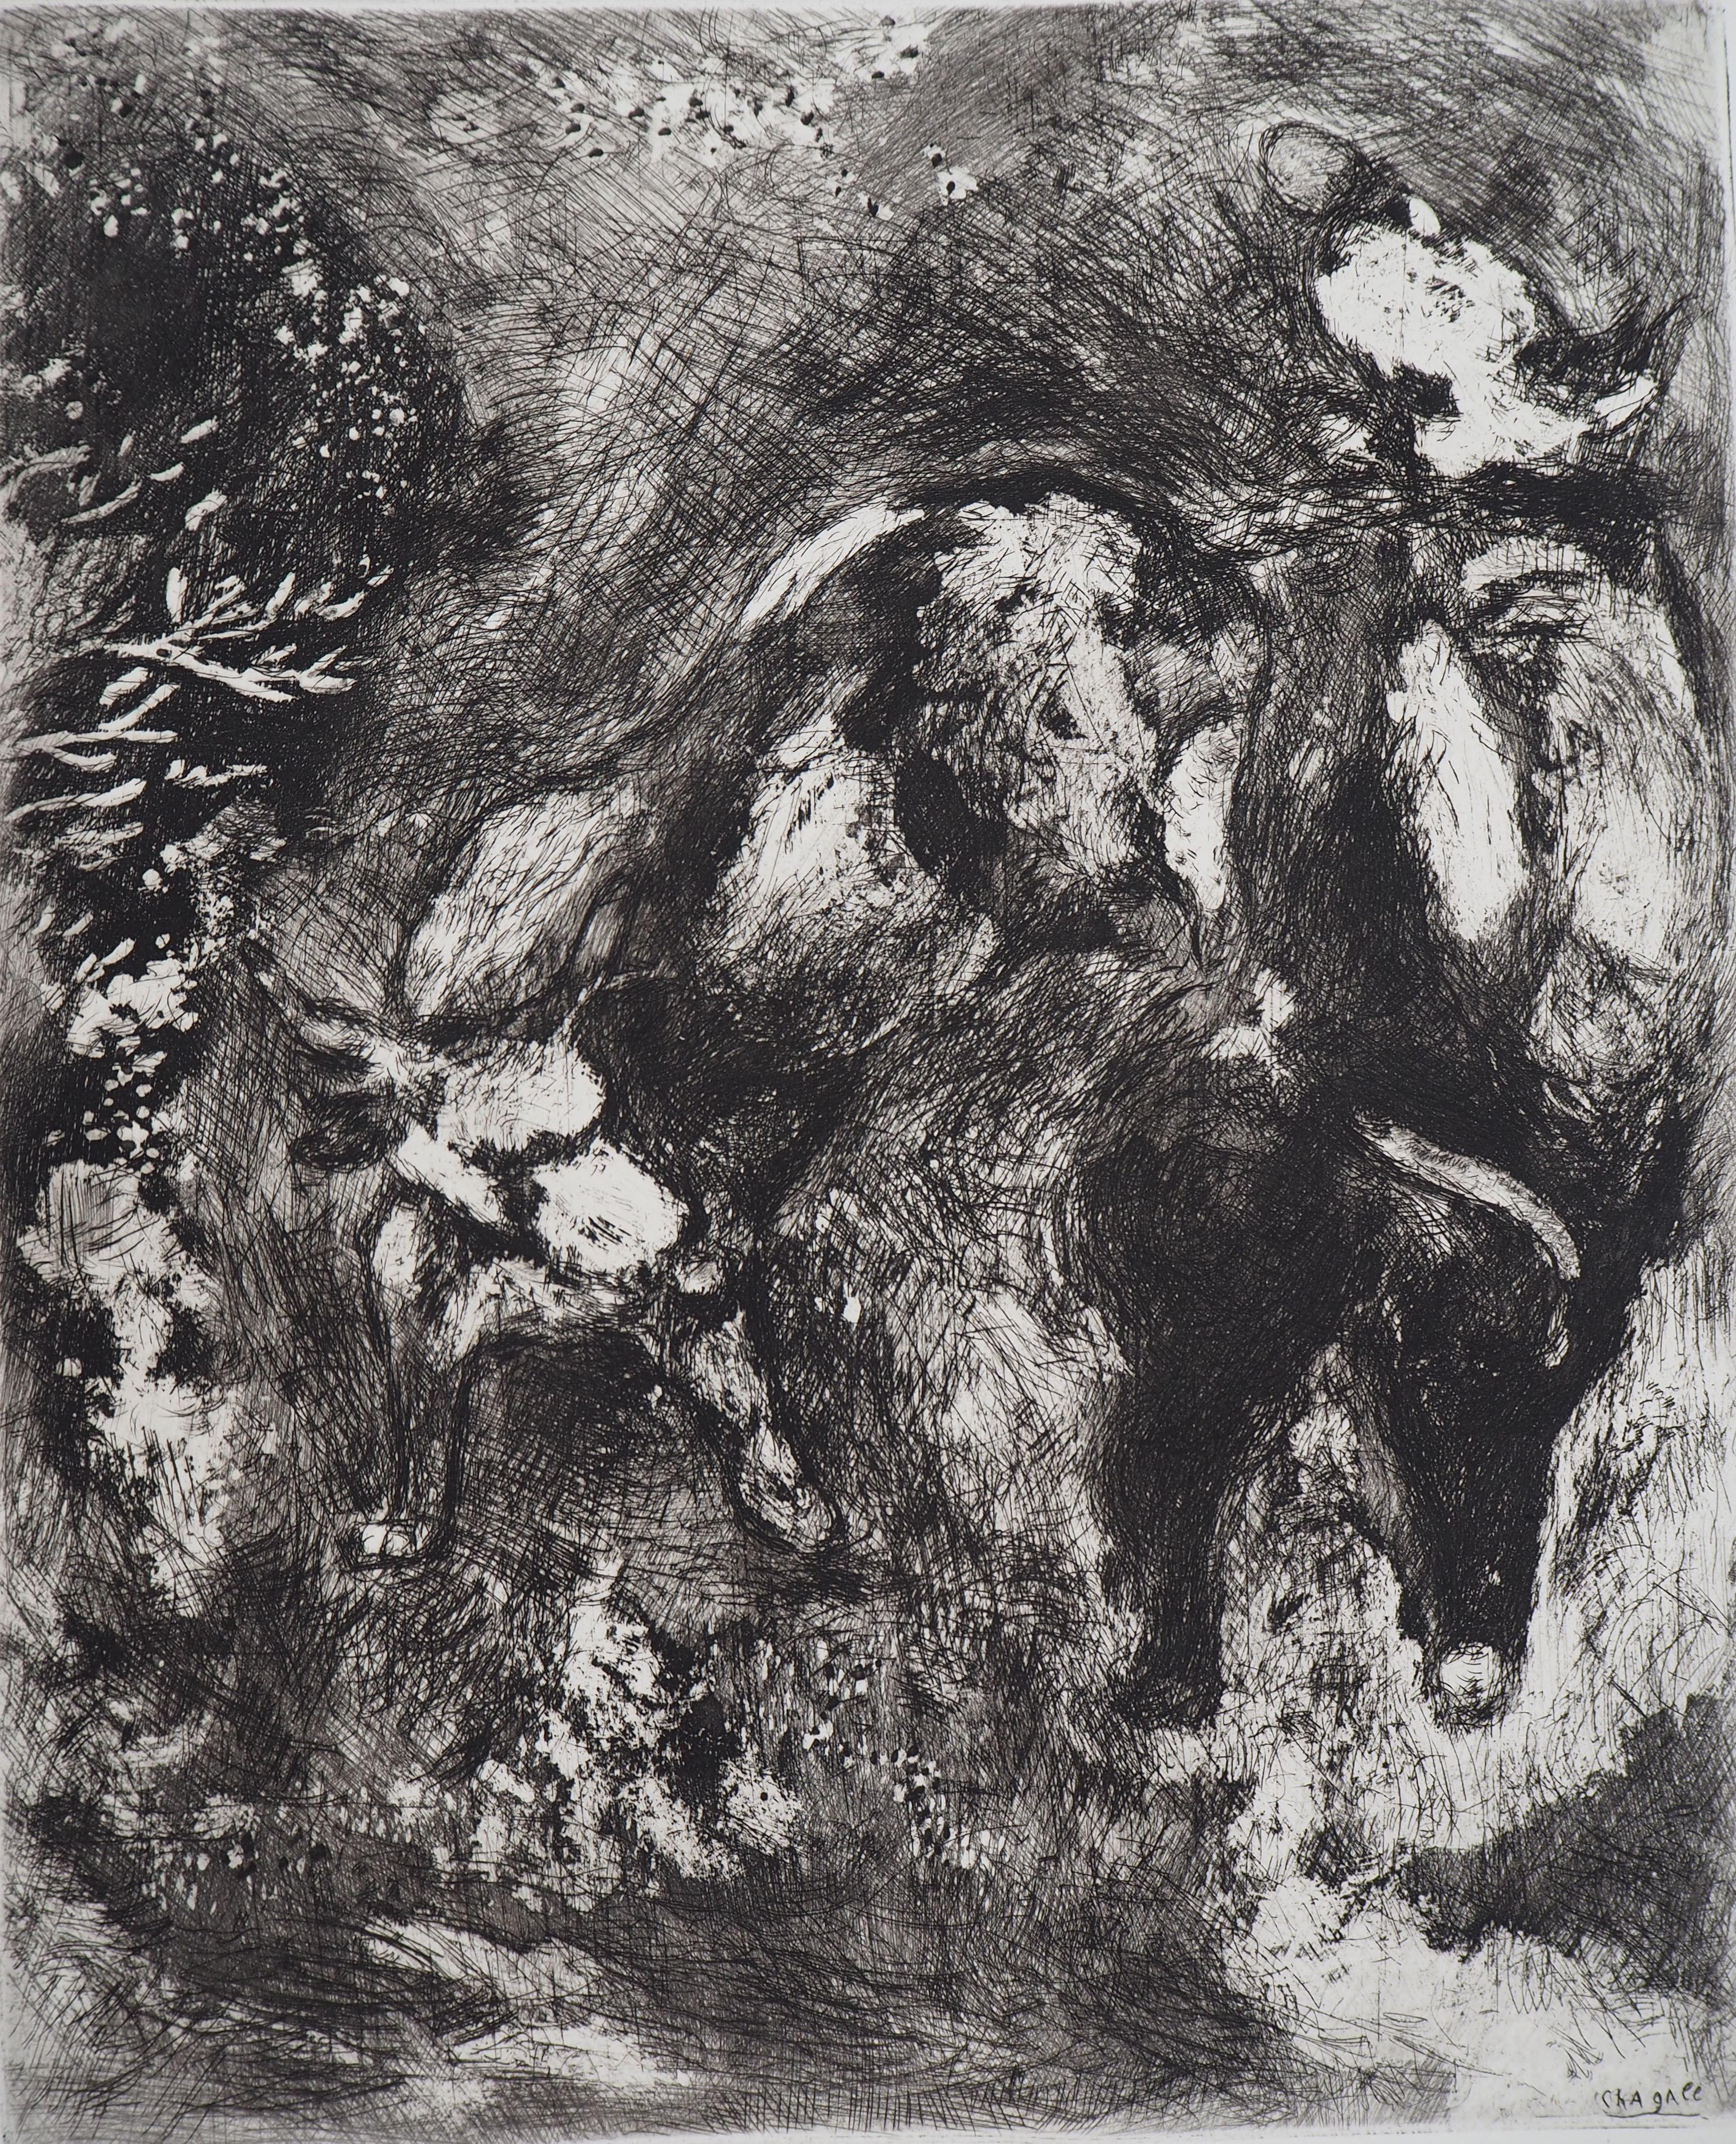 Bulls and a Frog - Original Etching - Ref. Sorlier #106 - Print by Marc Chagall